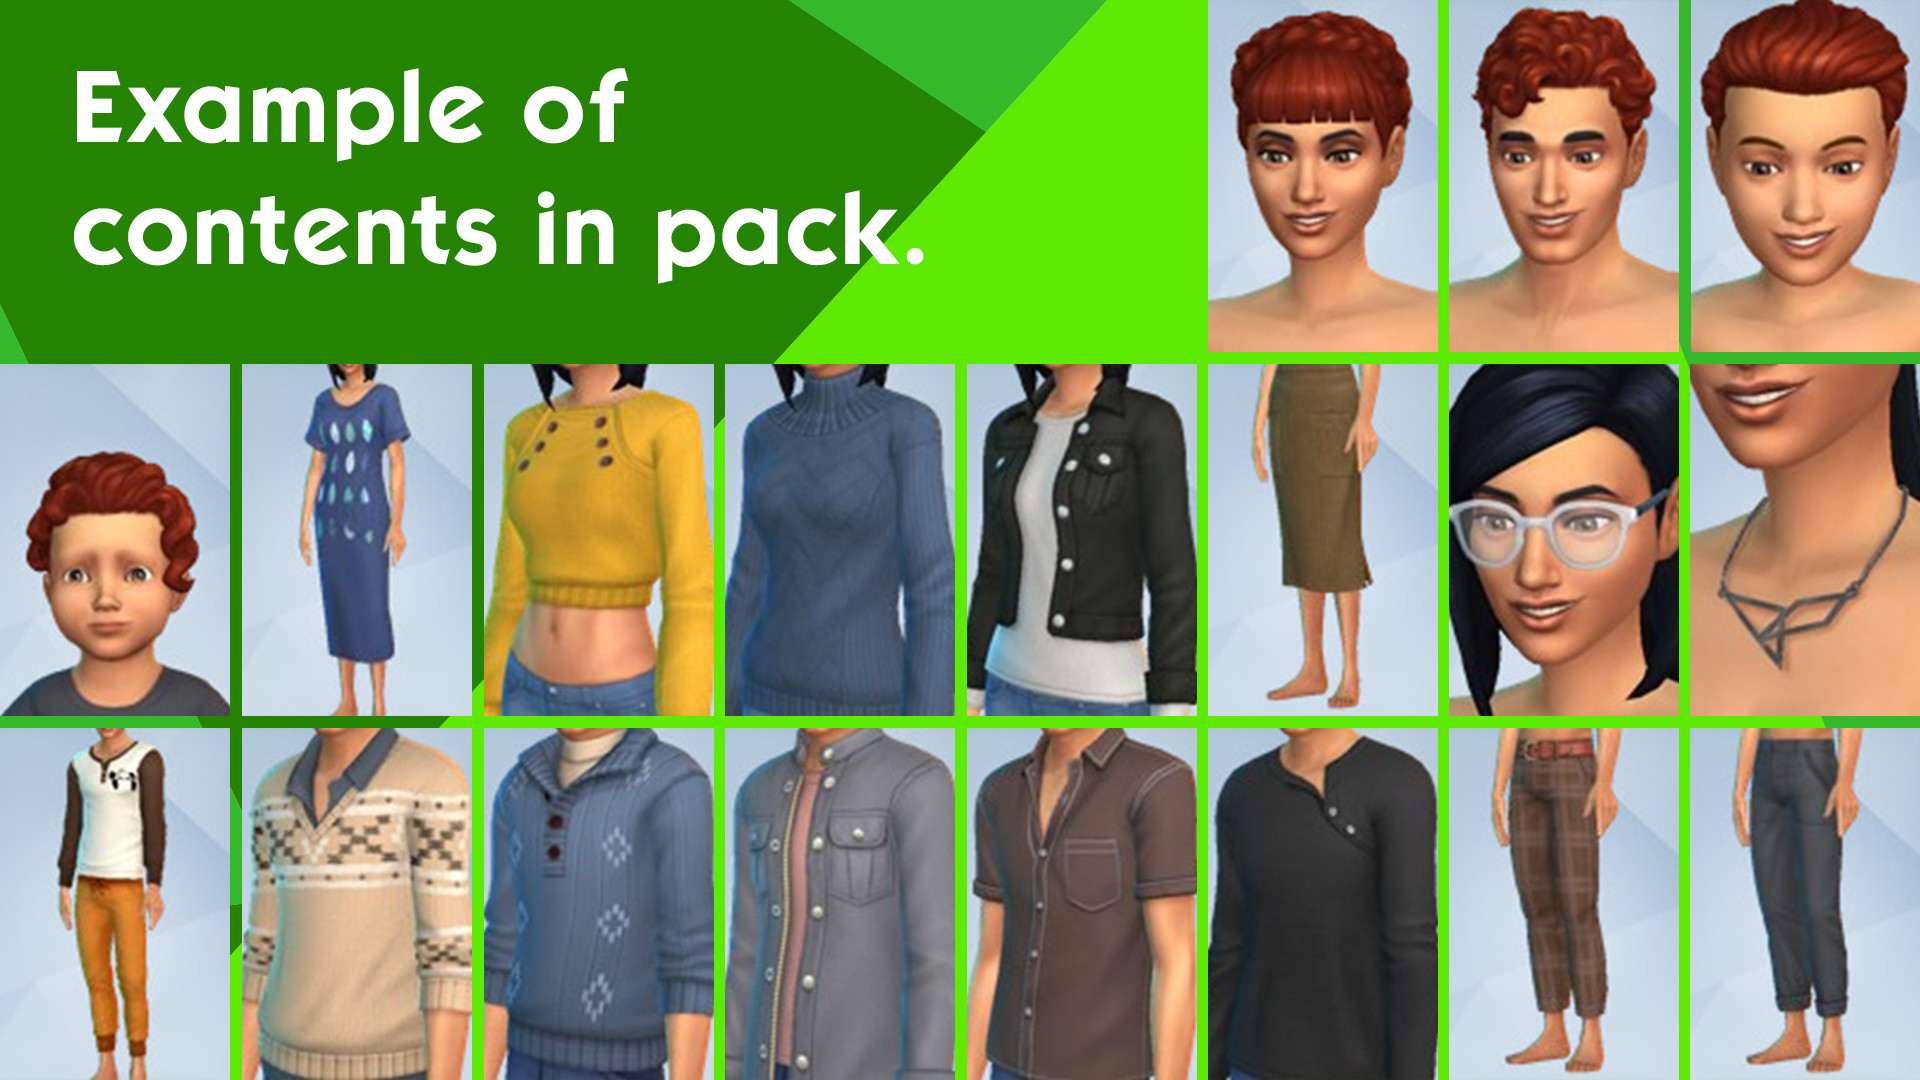 The Sims 4 Tiny Living (SP16)| Stuff Pack | PC/Mac | VideoGame | PC  Download Origin Code | English